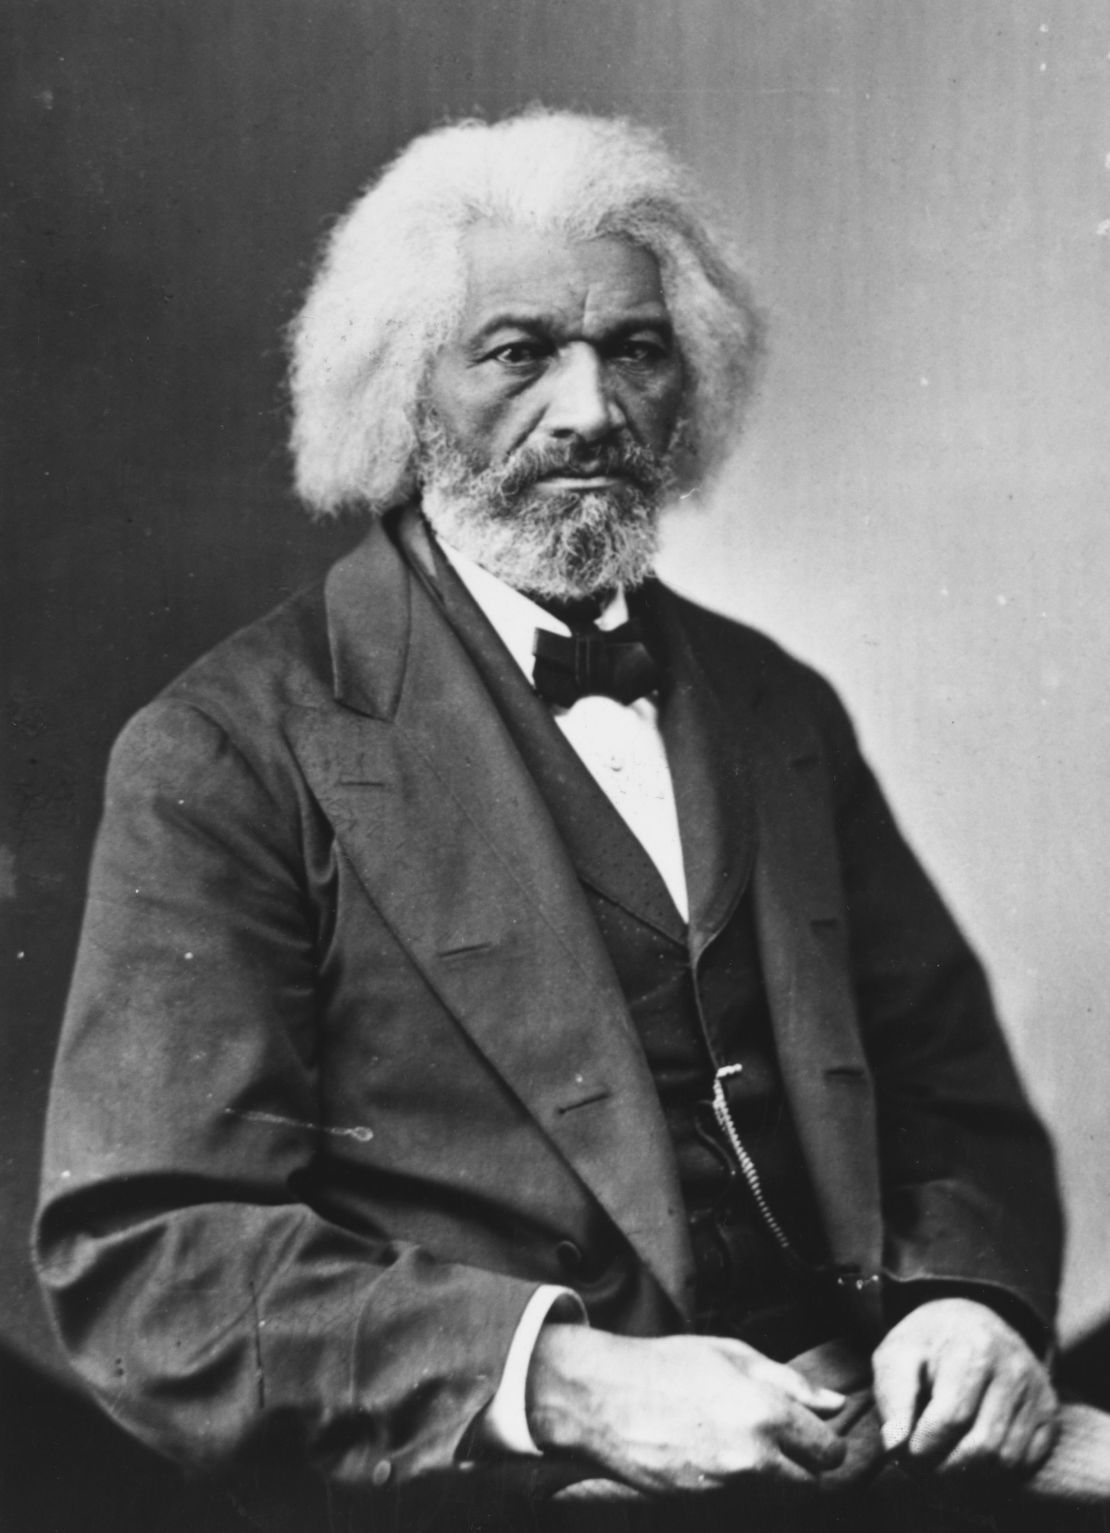 Frederick Douglass published abolitionist newspapers in Rochester, New York, and gave notable speeches in the city for years before he moved to Washington. 